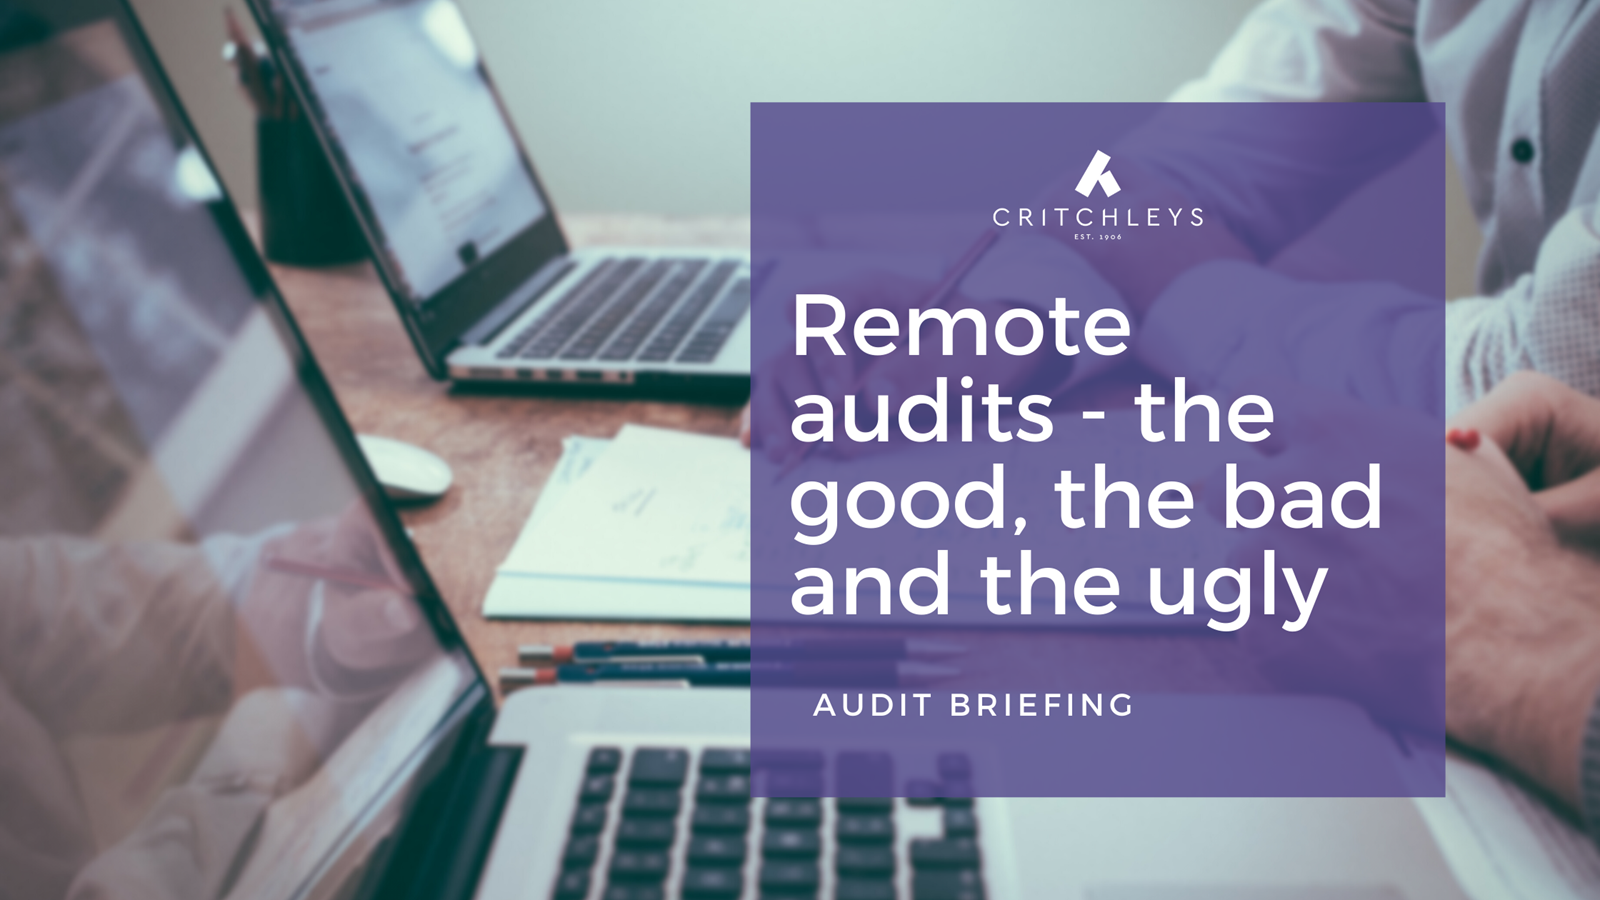 Remote audits - the good, the bad and the ugly